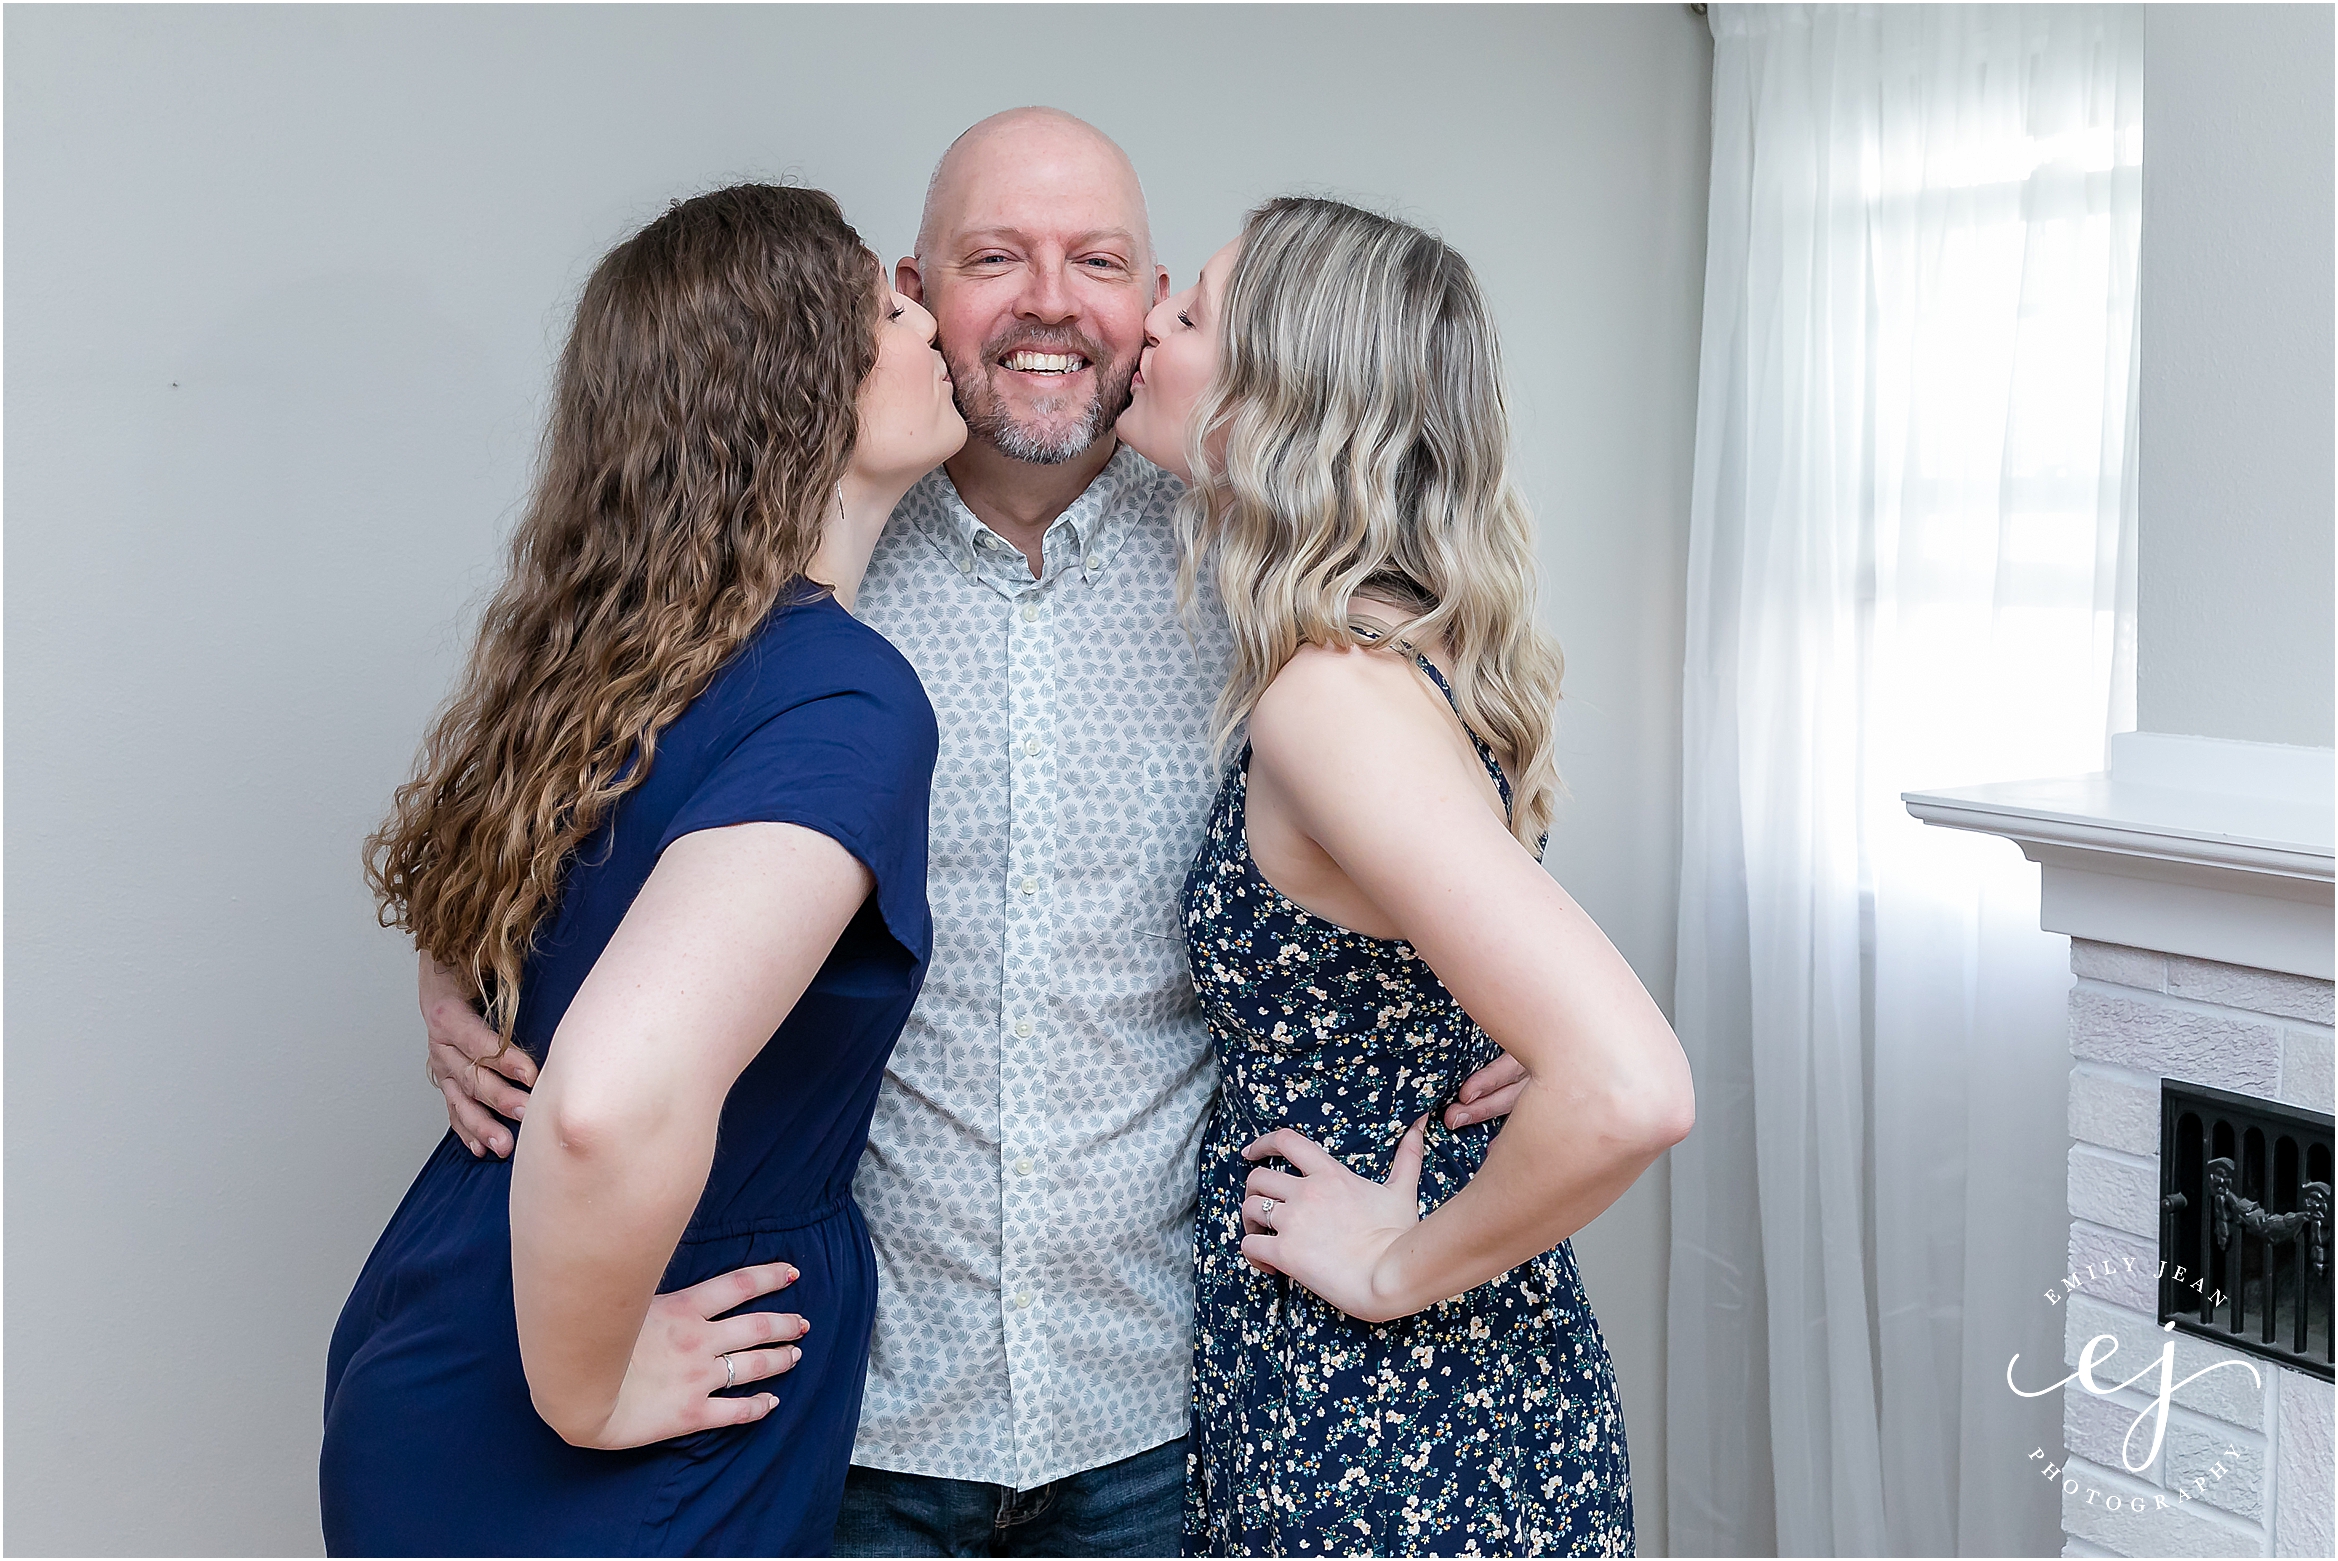 Adult daughters kissing their dad on the cheek La Crosse Wisconsin family portraits